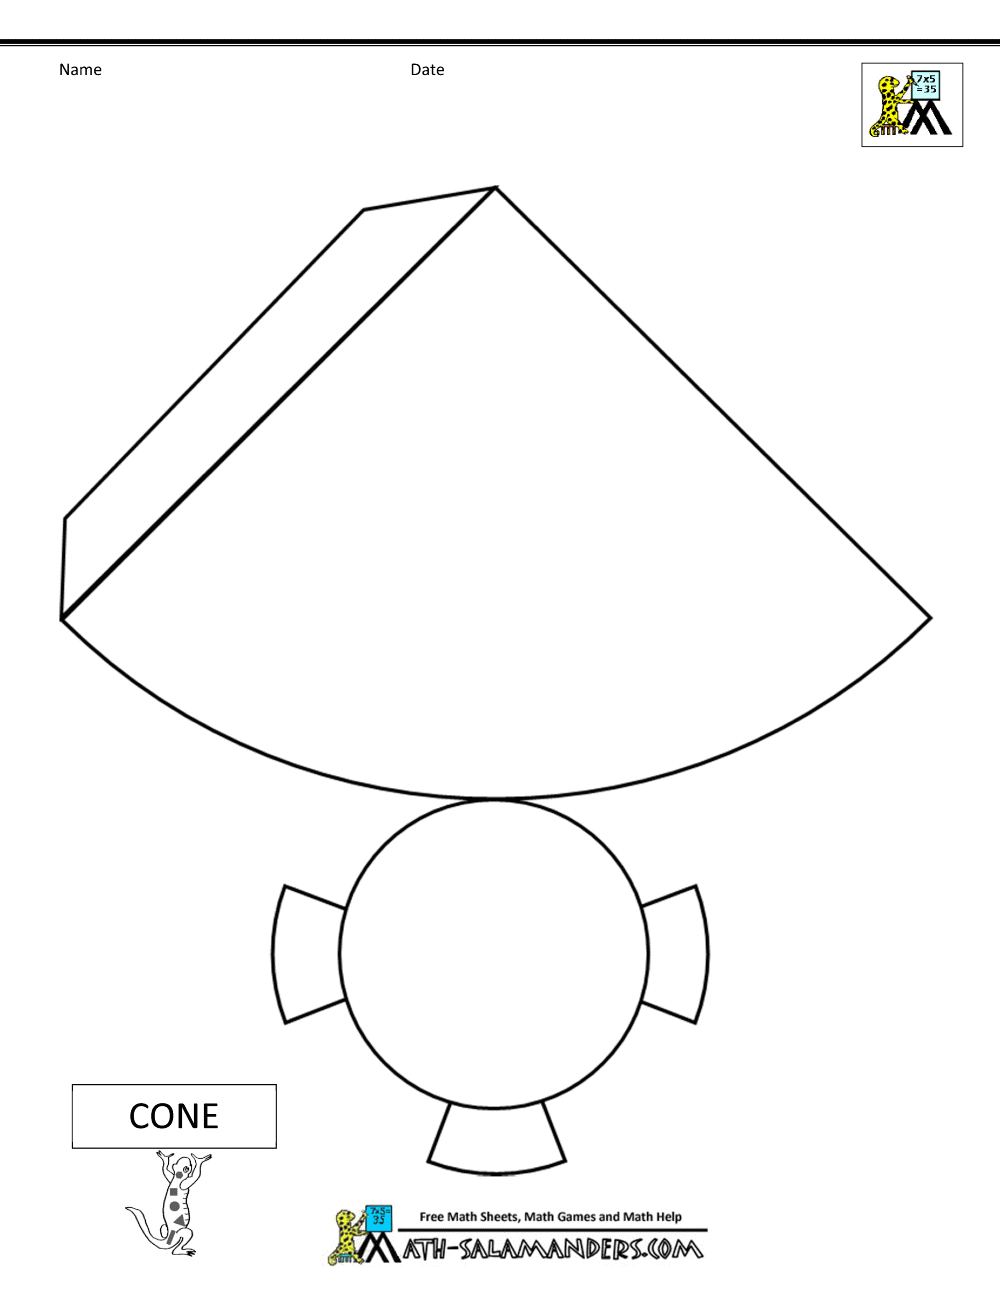 free-cone-3-d-shape-download-free-cone-3-d-shape-png-images-free